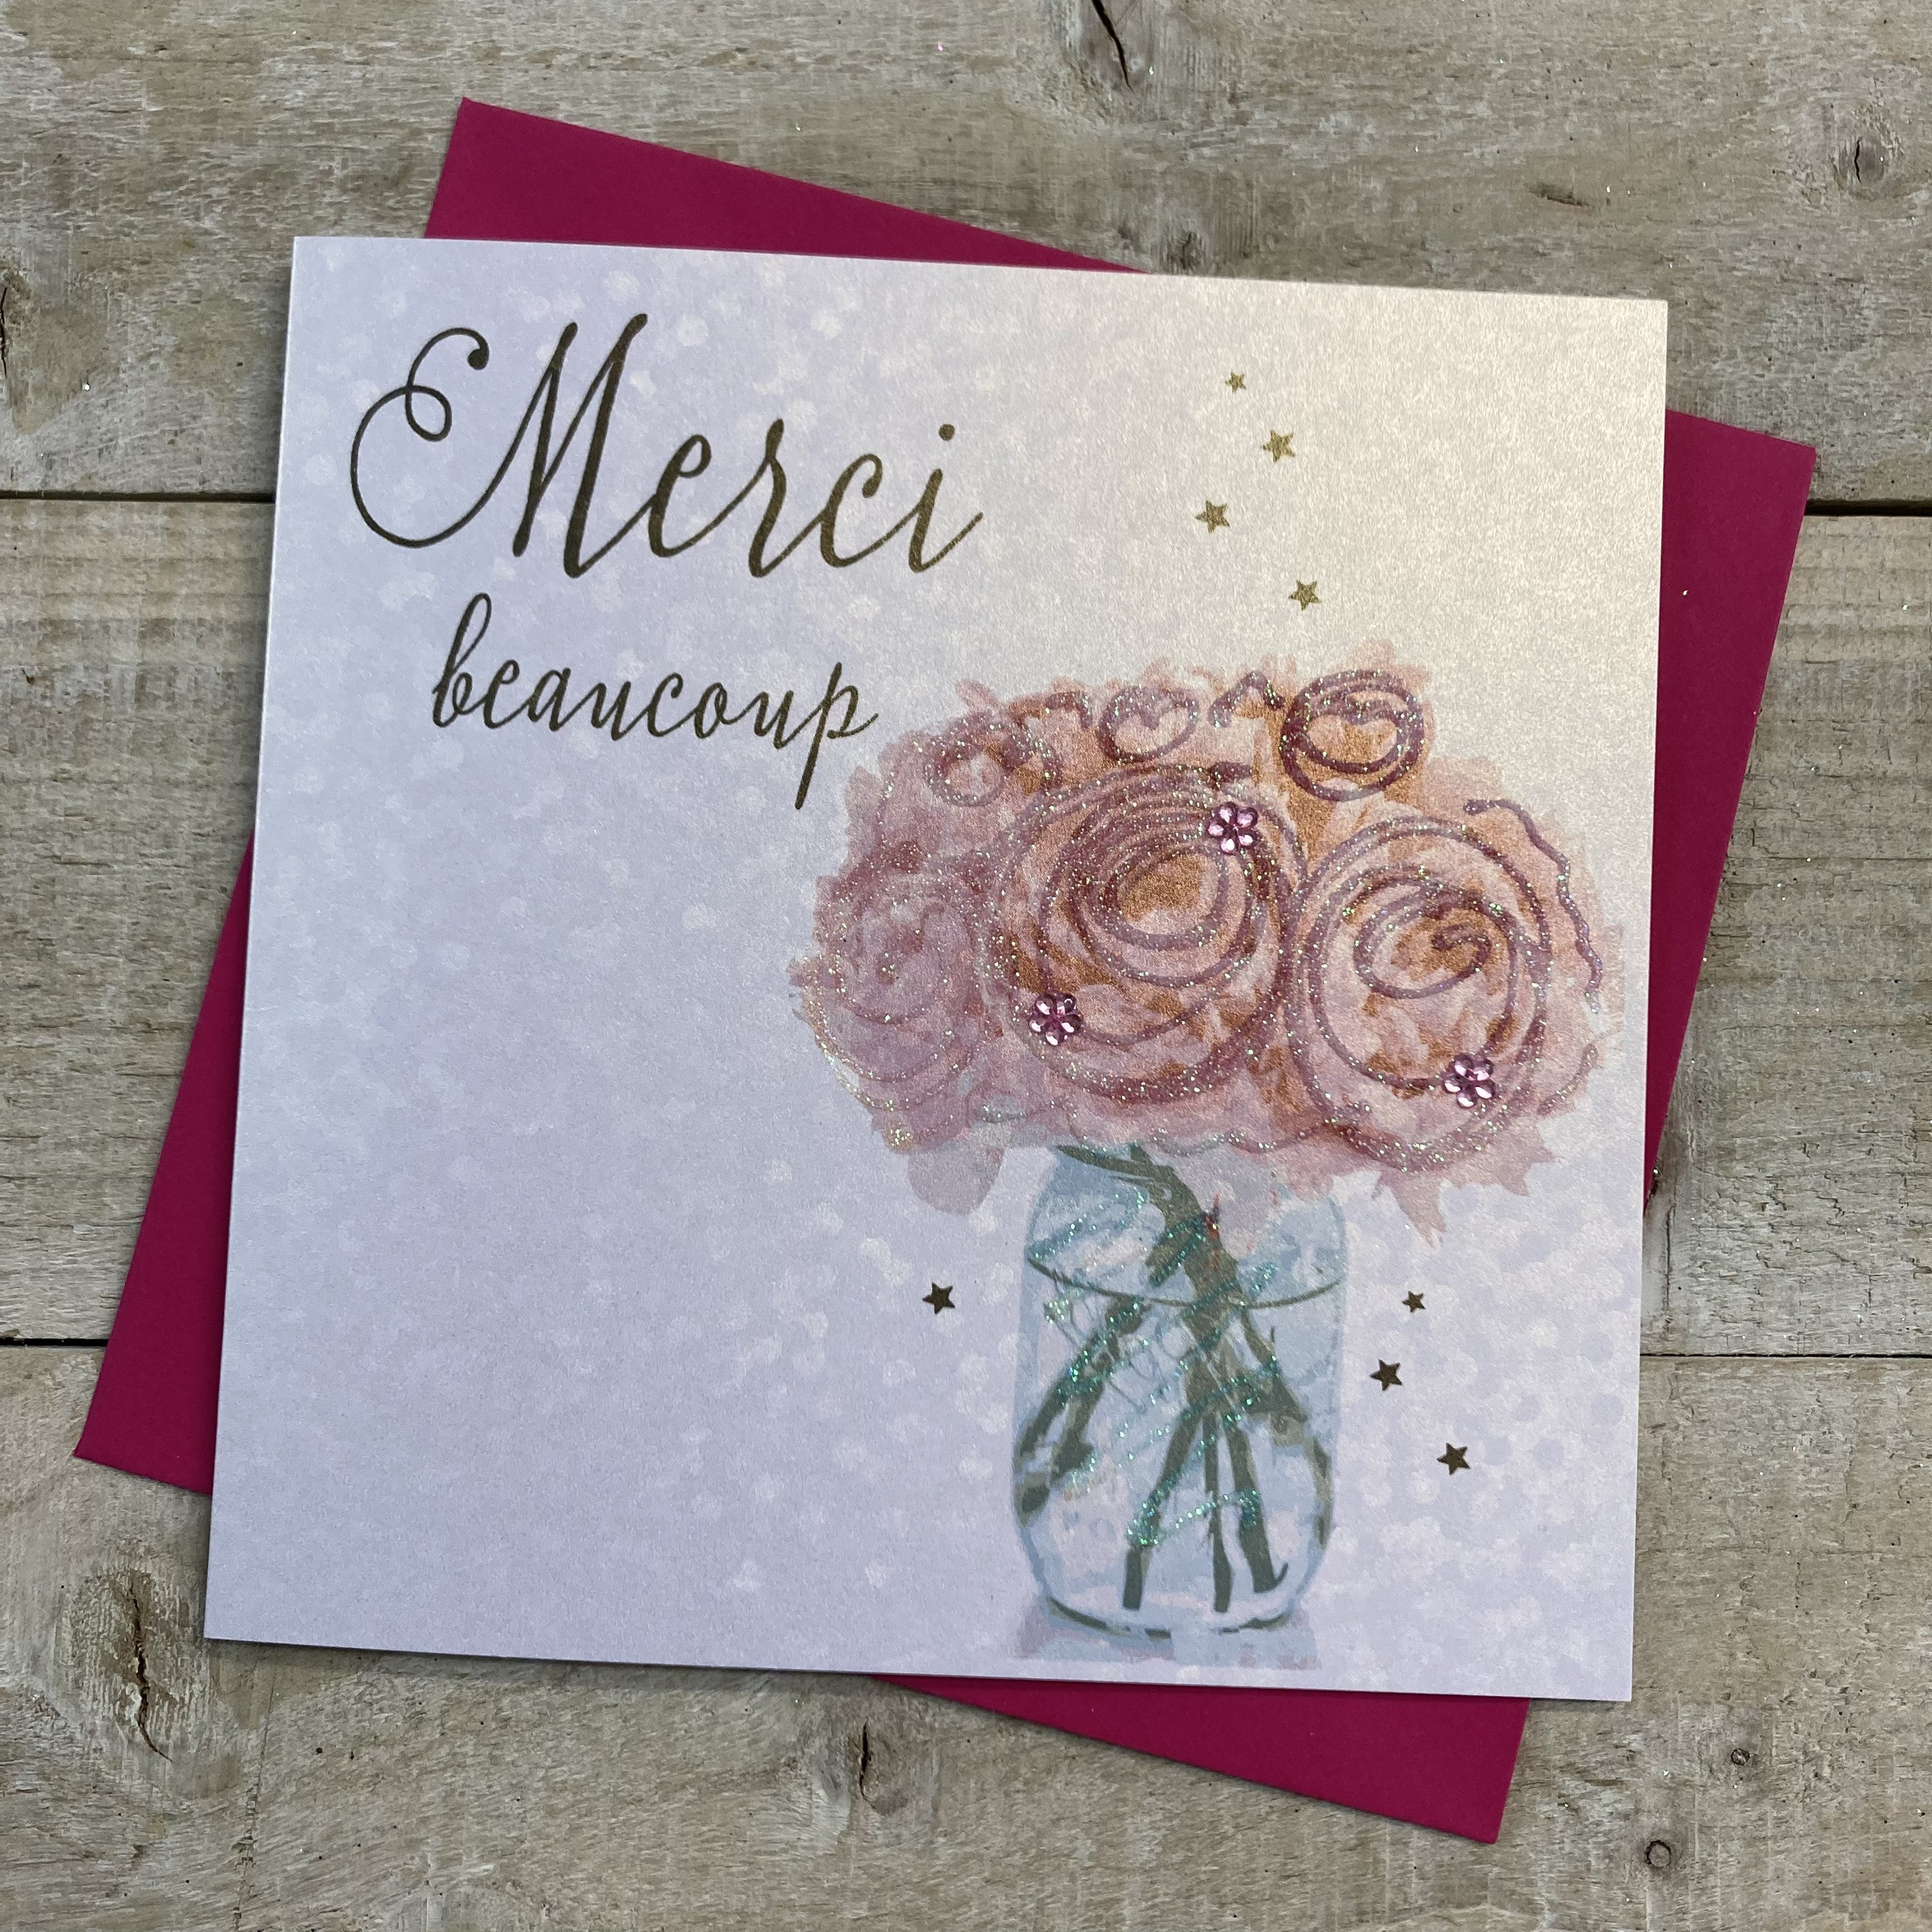 Merci Beaucoup Thank You Very Much In French Greeting Card Royalty